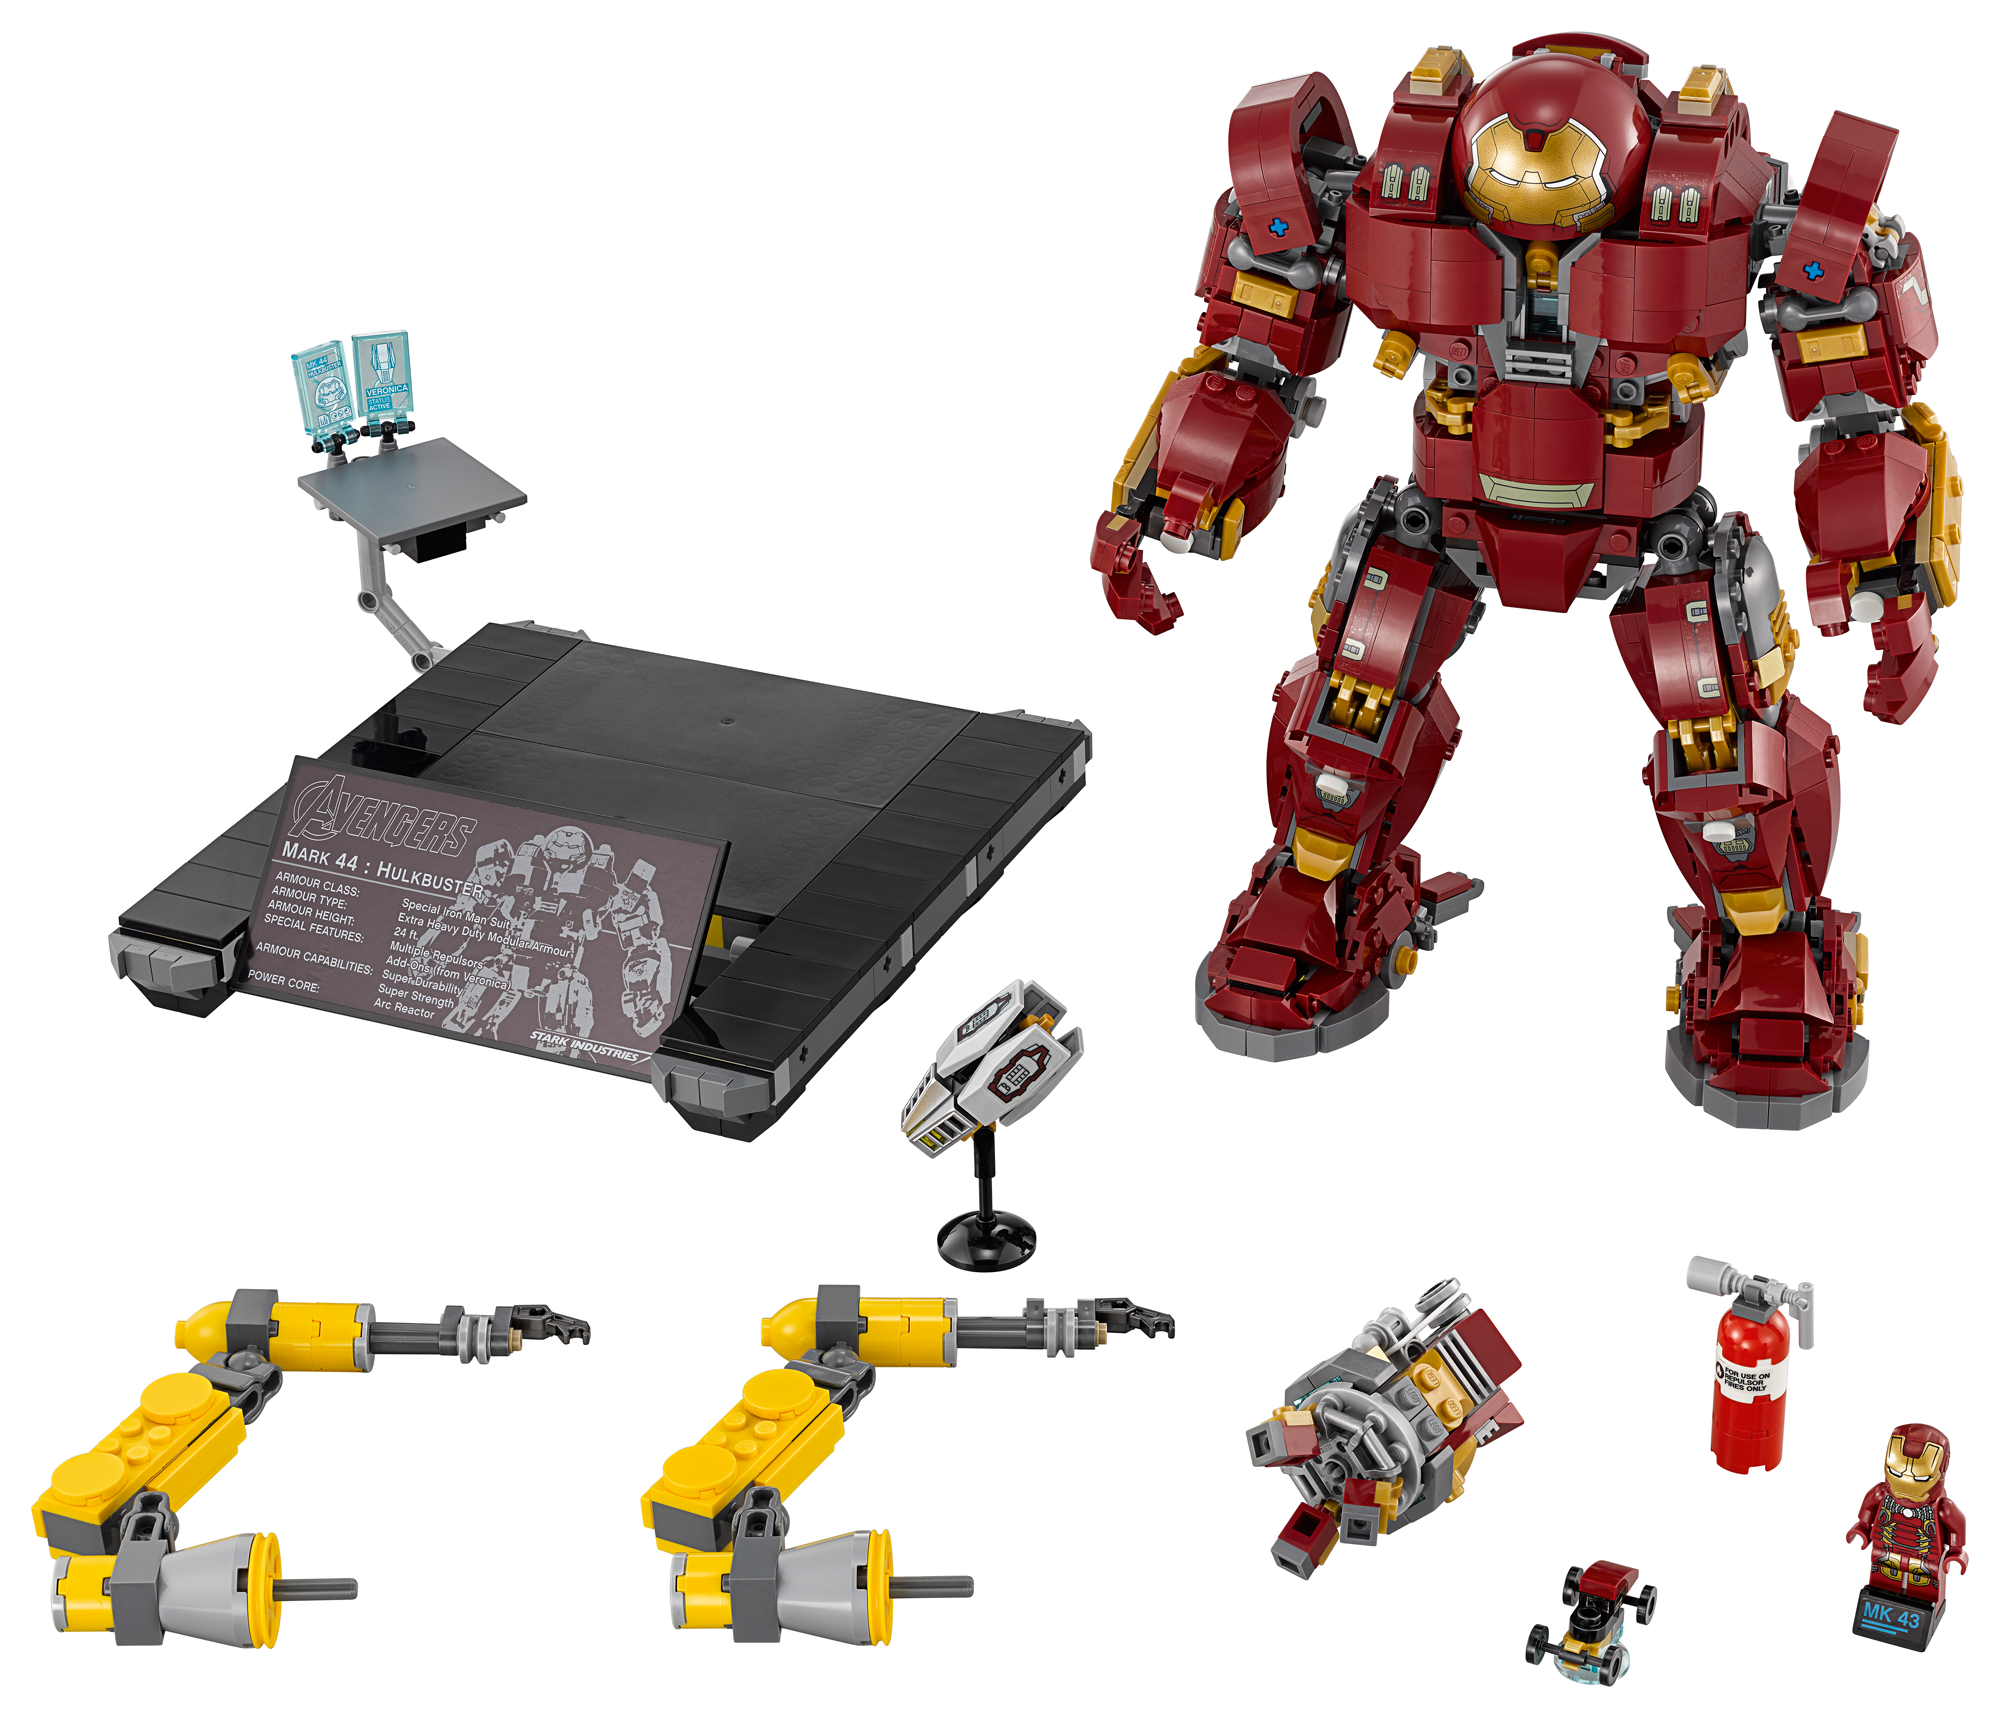 check-out-this-incredibly-cool-iron-man-hulkbuster-lego-playset11.png